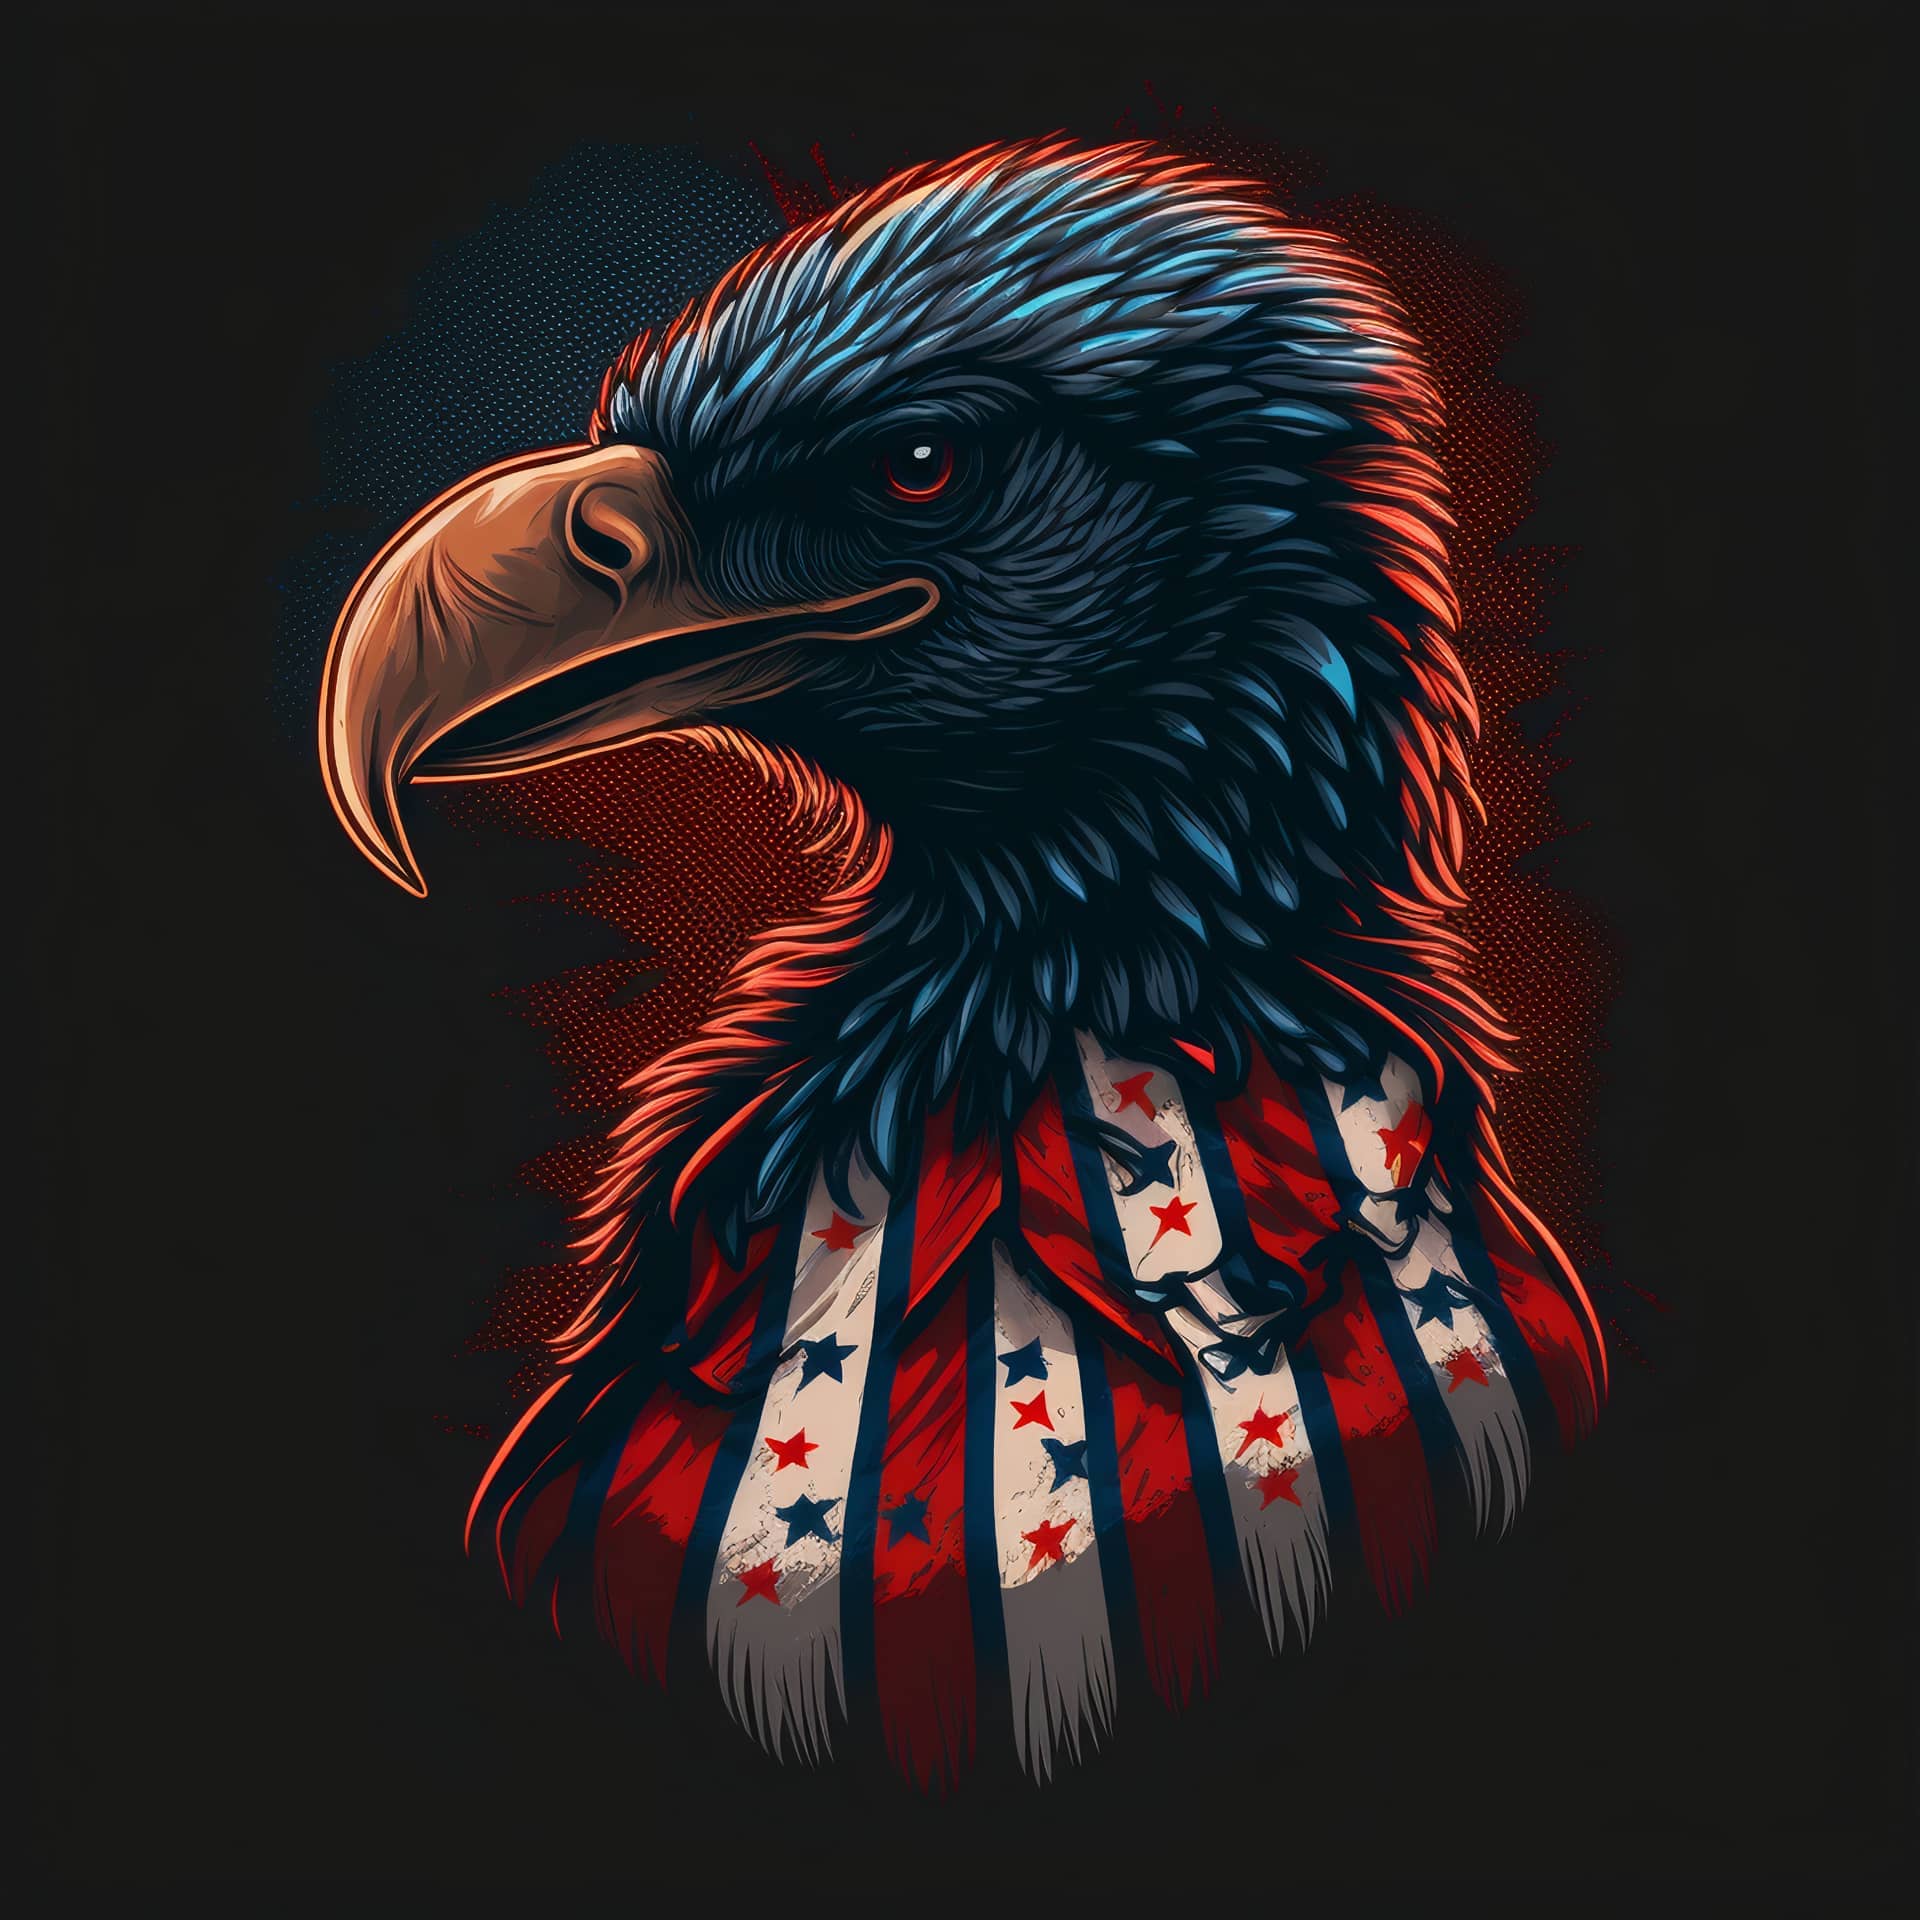 Vulture design with american flag facebook profile pic